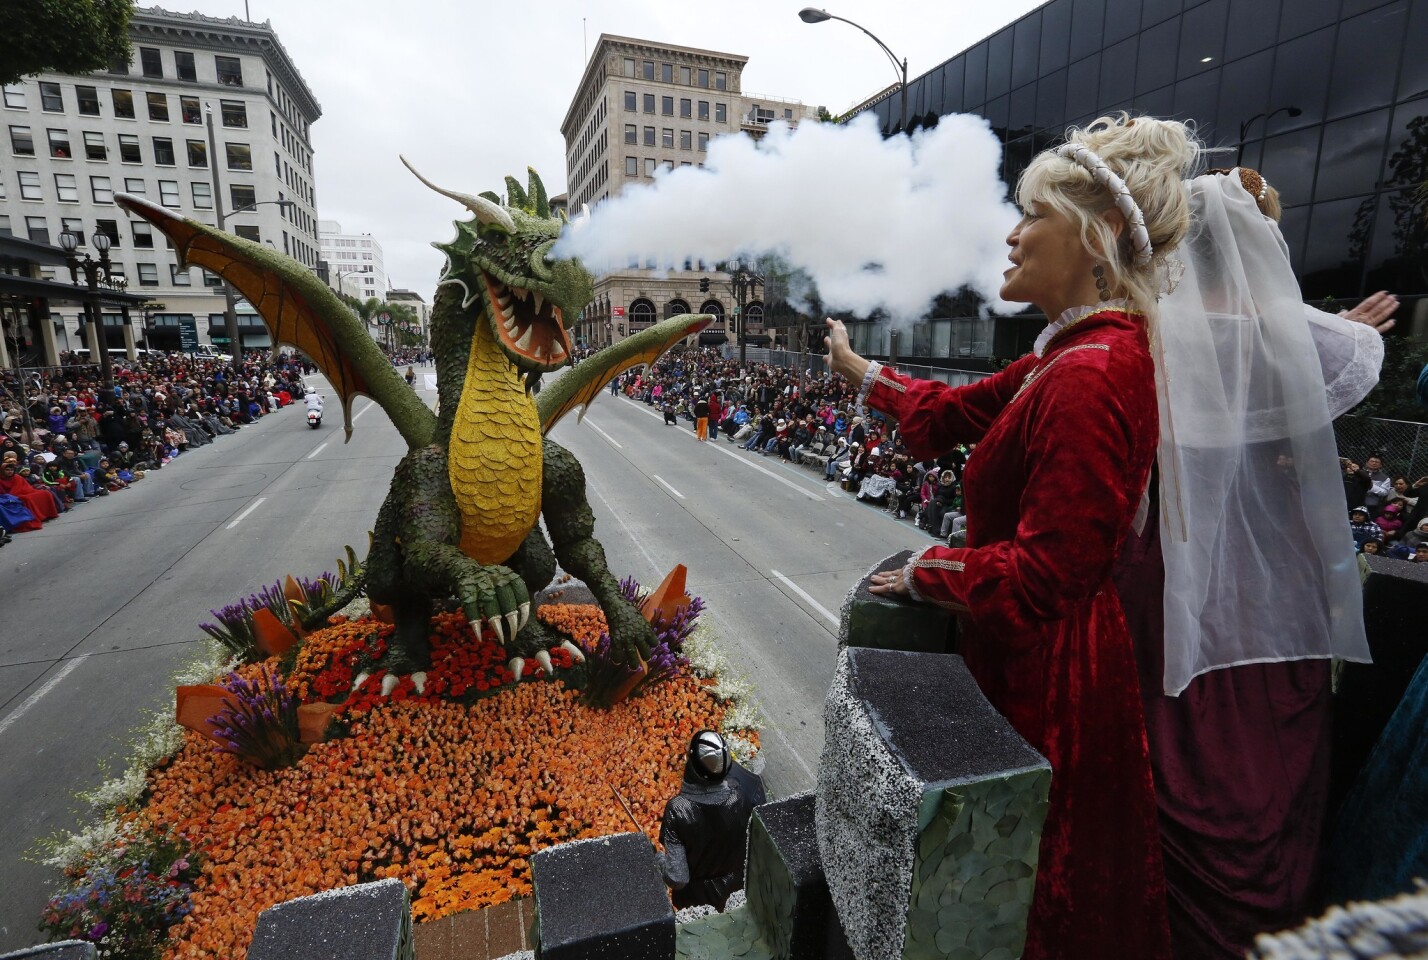 Beth Campbell, left, dressed as a medieval princess, wave to the crowd as the Rose Parade float from the City of Torrance makes its way along Colorado Blvd. in Pasadena on Monday.